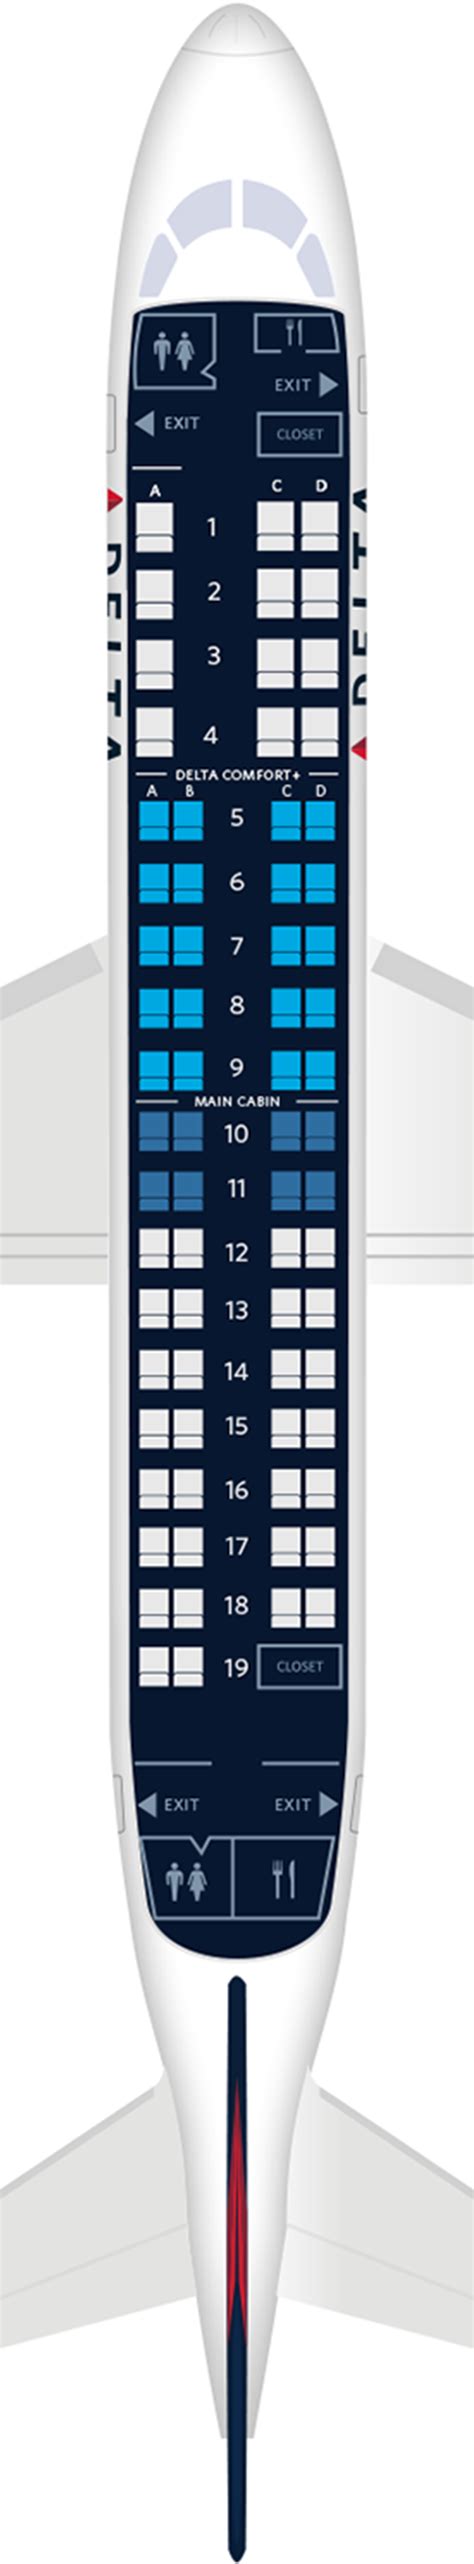 embraer 175 seat map